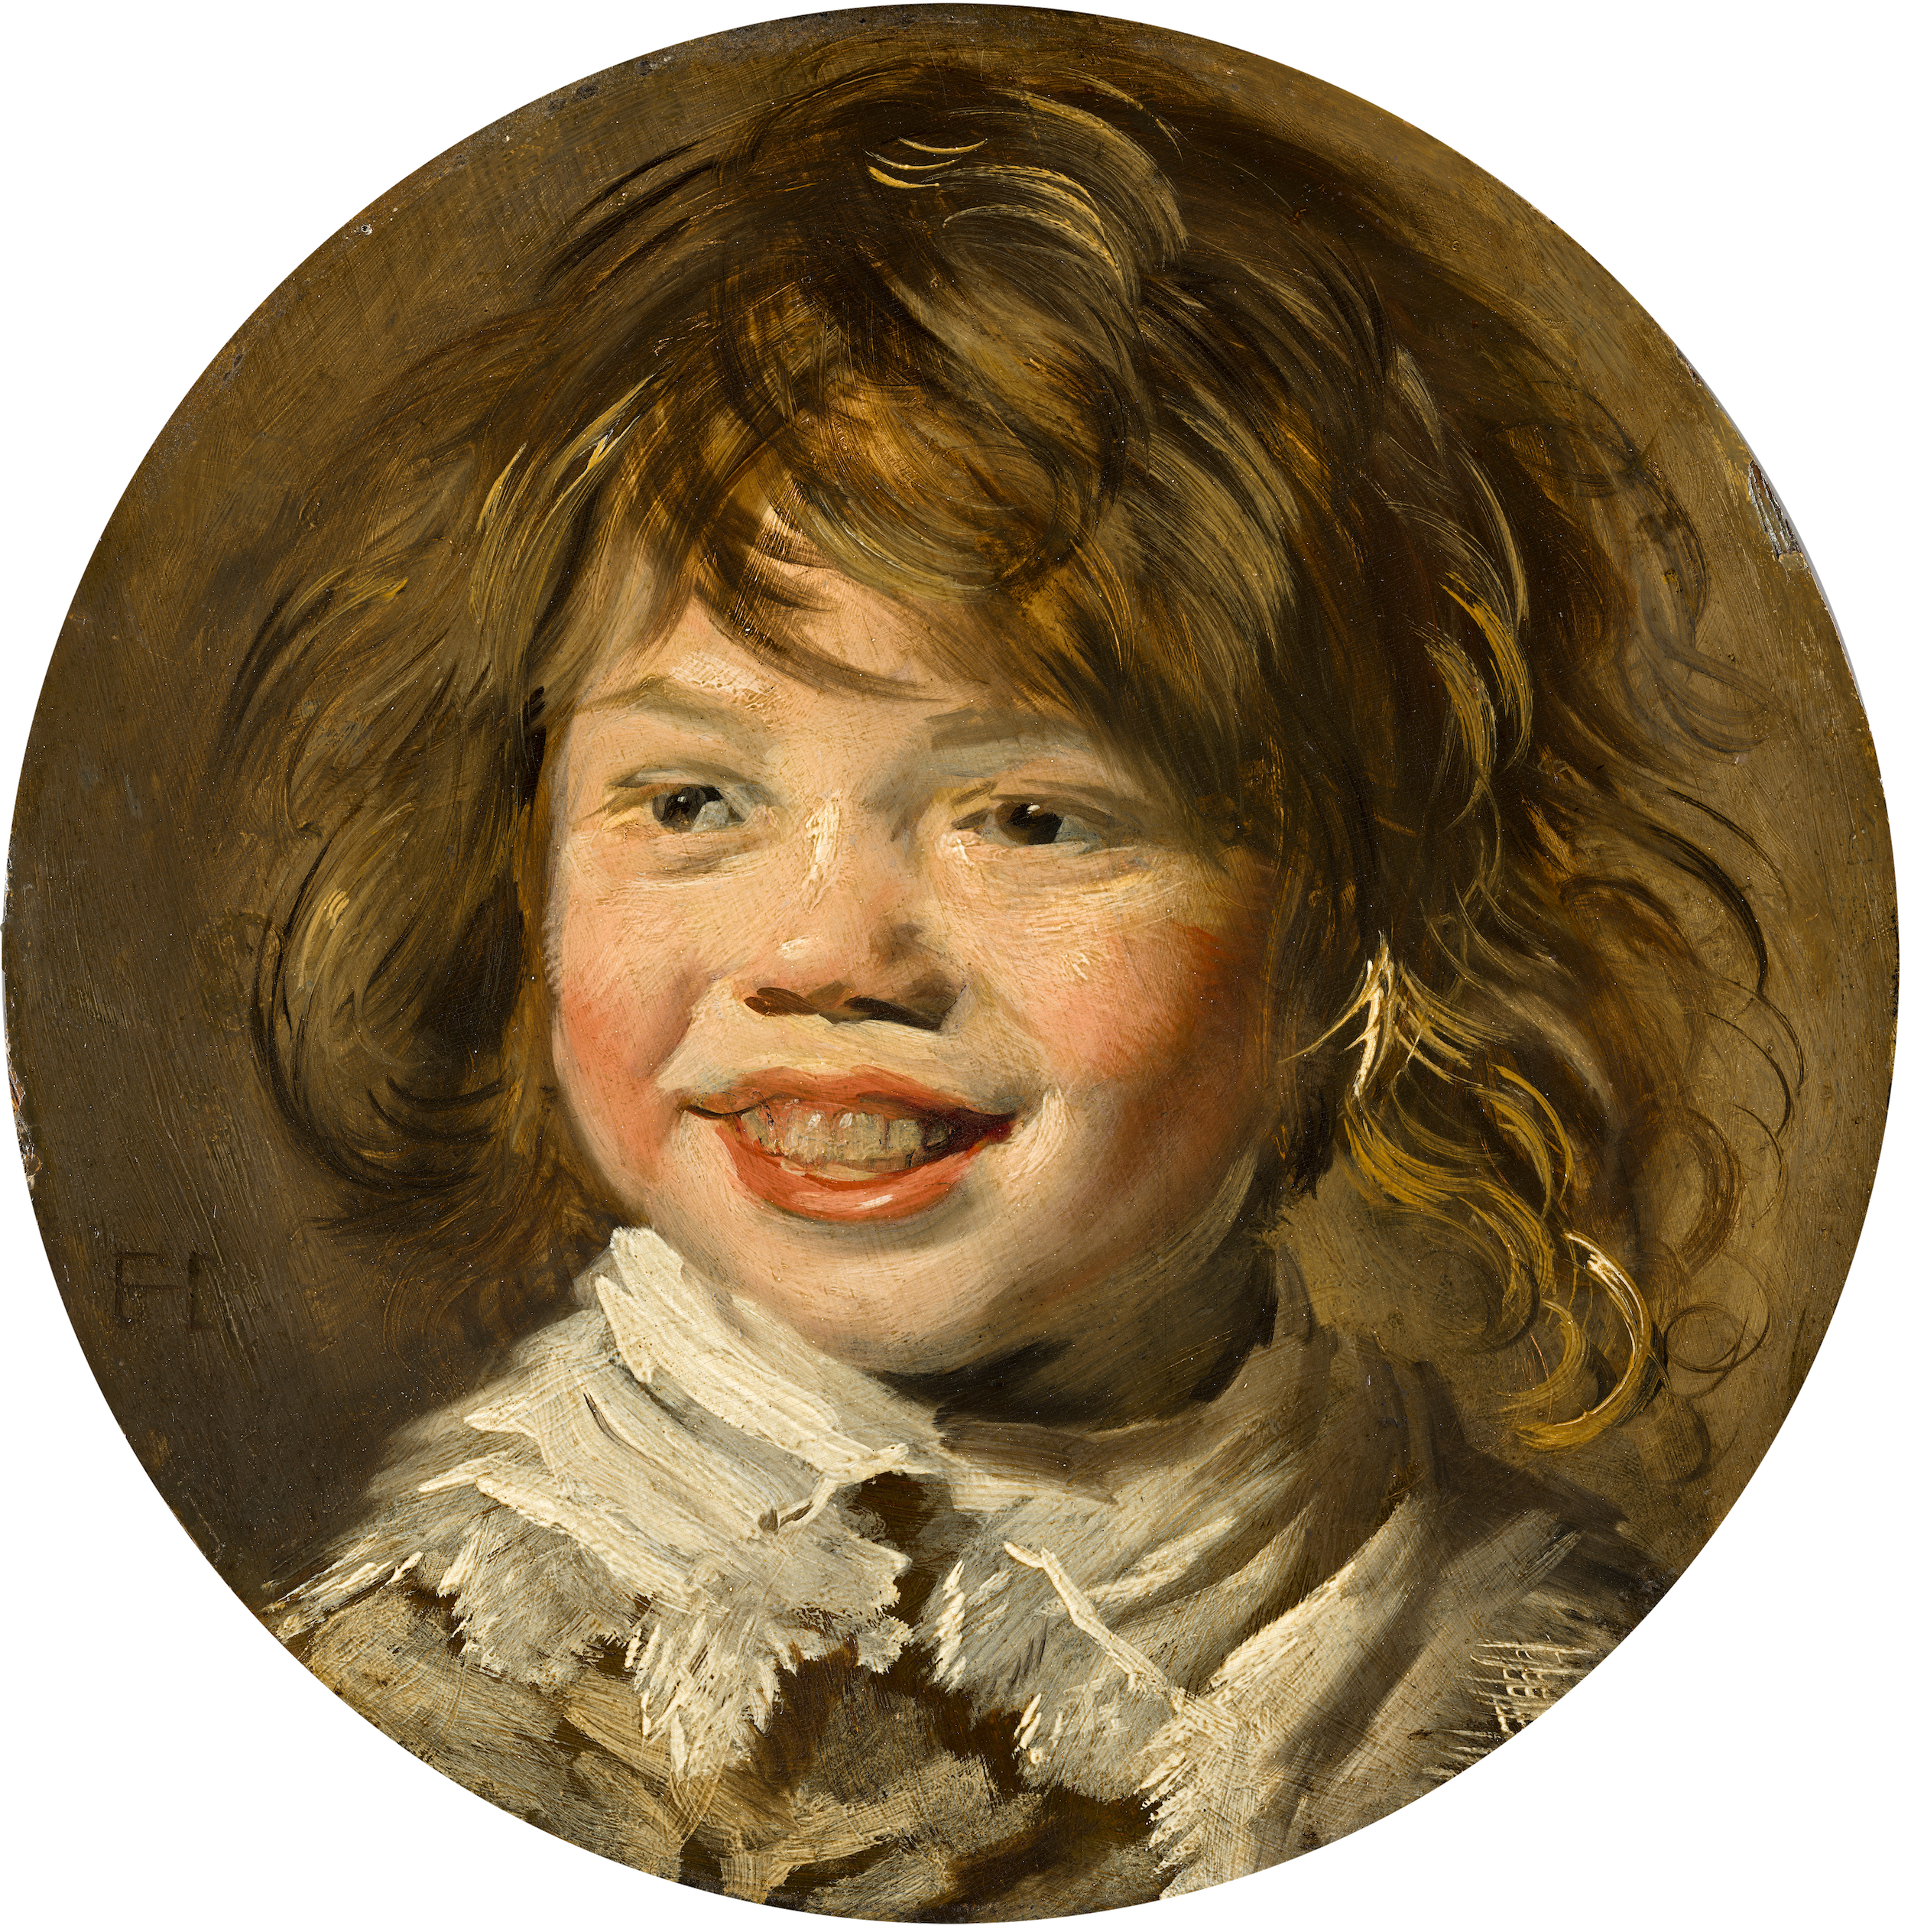 Laughing Boy by Frans Hals - 1625 - 30.45 cm diameter Mauritshuis, The Hague